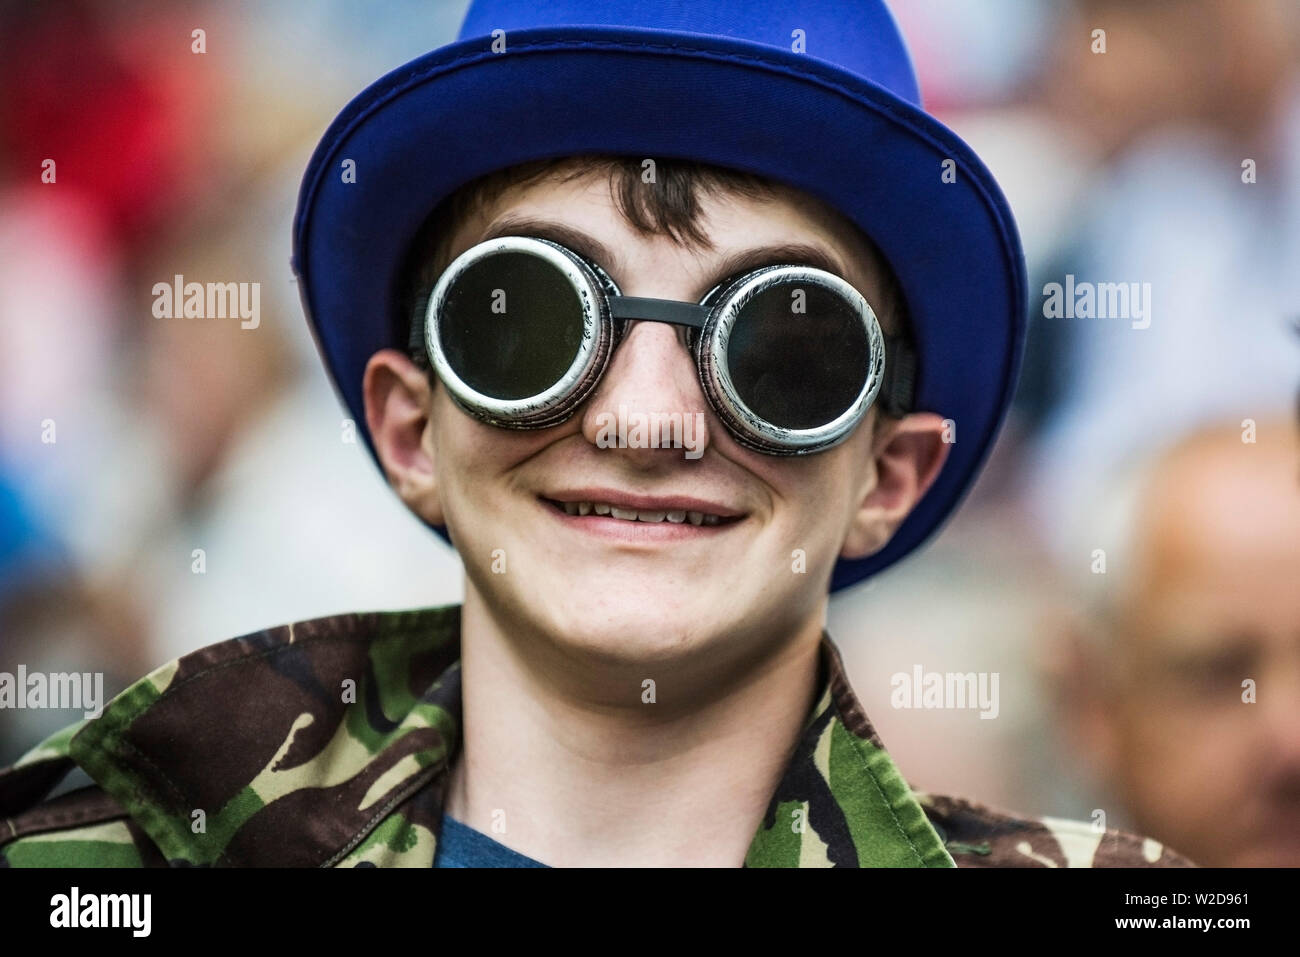 A teenager boy wearing steampunk goggles and a blue top hat. Stock Photo